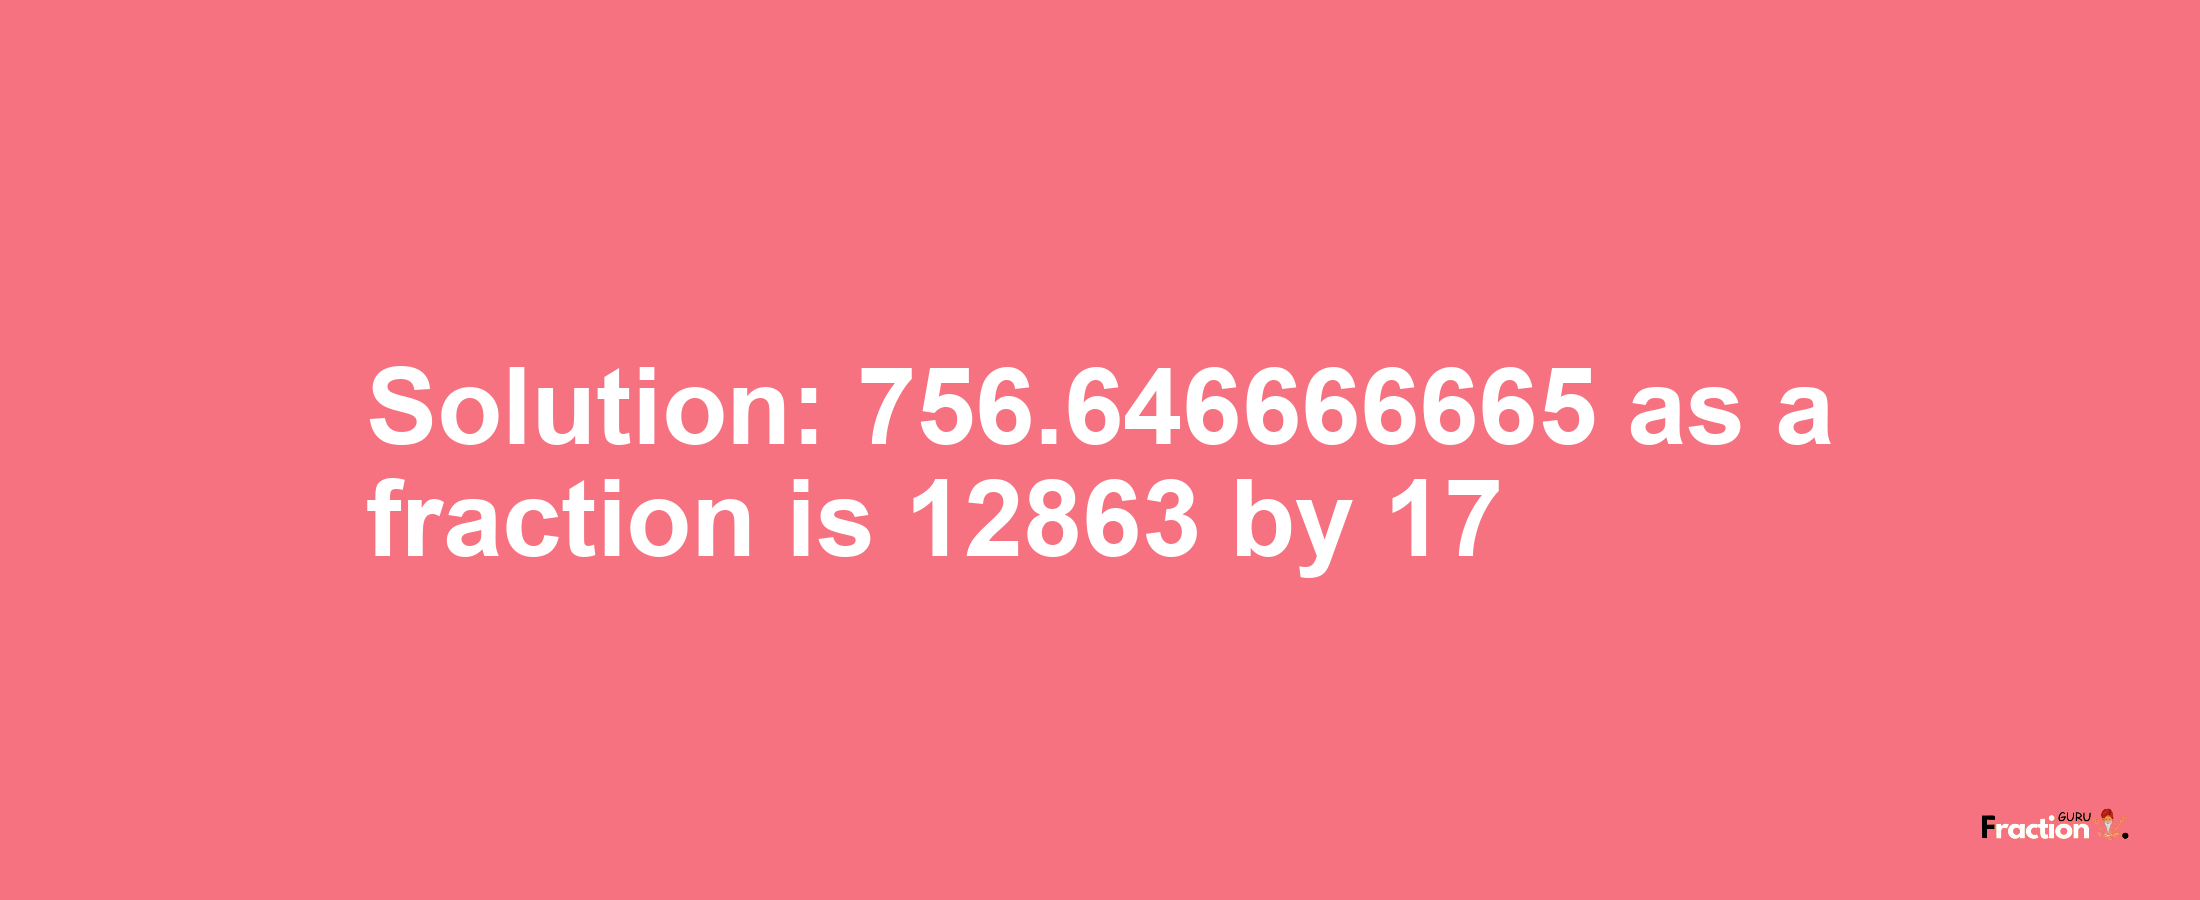 Solution:756.646666665 as a fraction is 12863/17